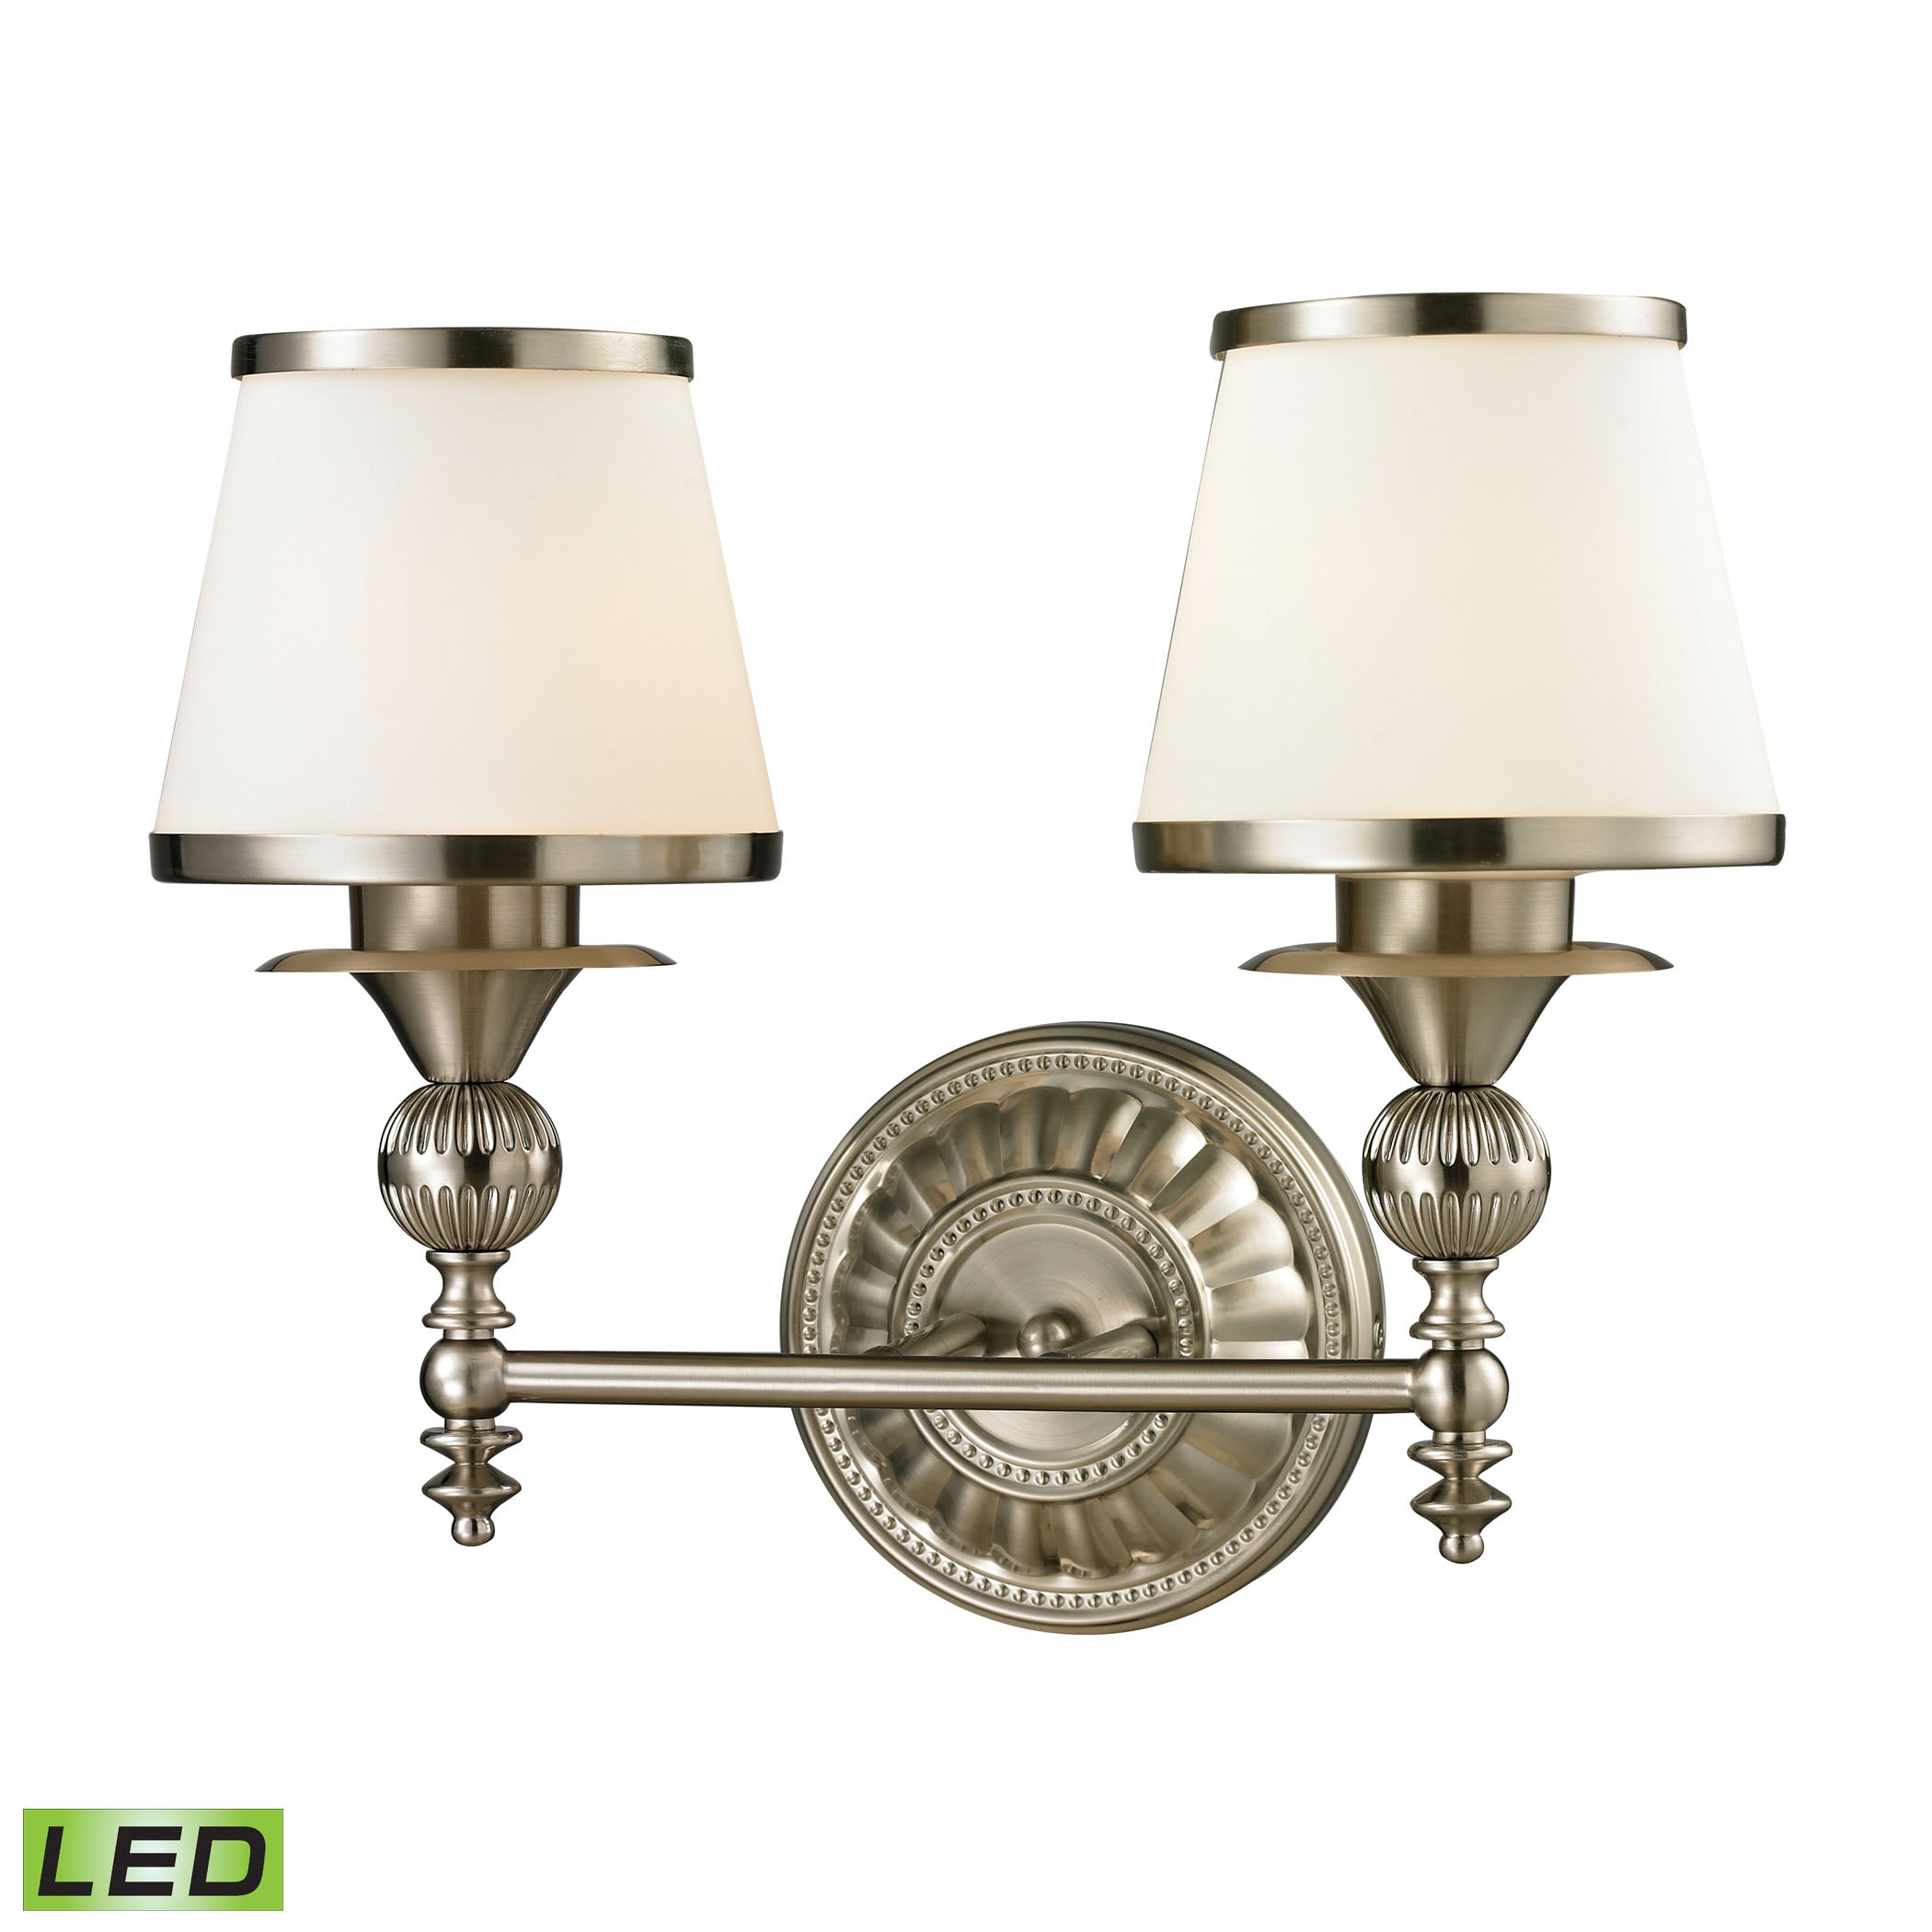 ELK Lighting 11601/2-LED Smithfield 2-Light Vanity Lamp in Brushed Nickel with Opal White Blown Glass - Includes LED Bulbs